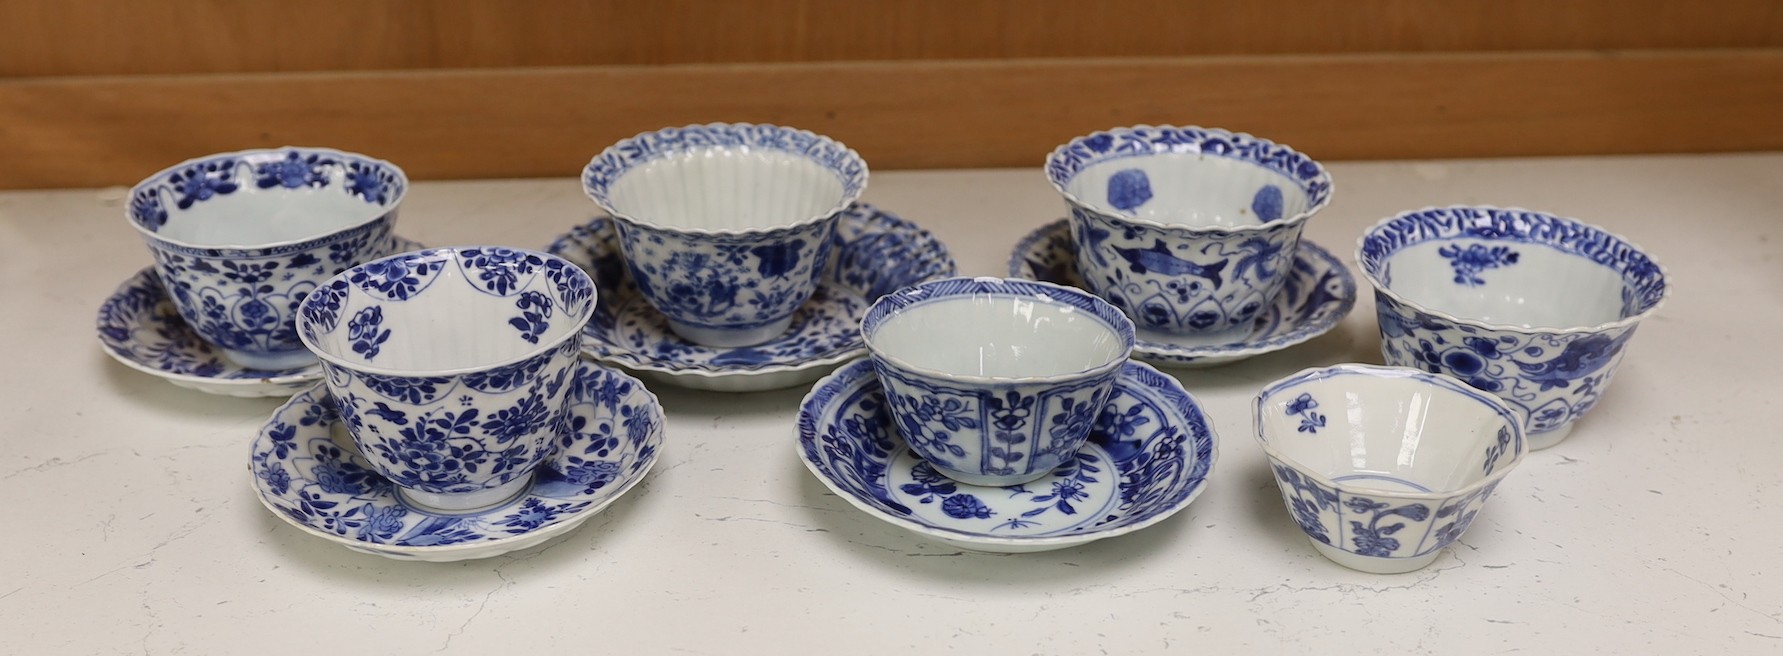 A group of seven Chinese blue and white tea bowls and five saucers, 18th-century